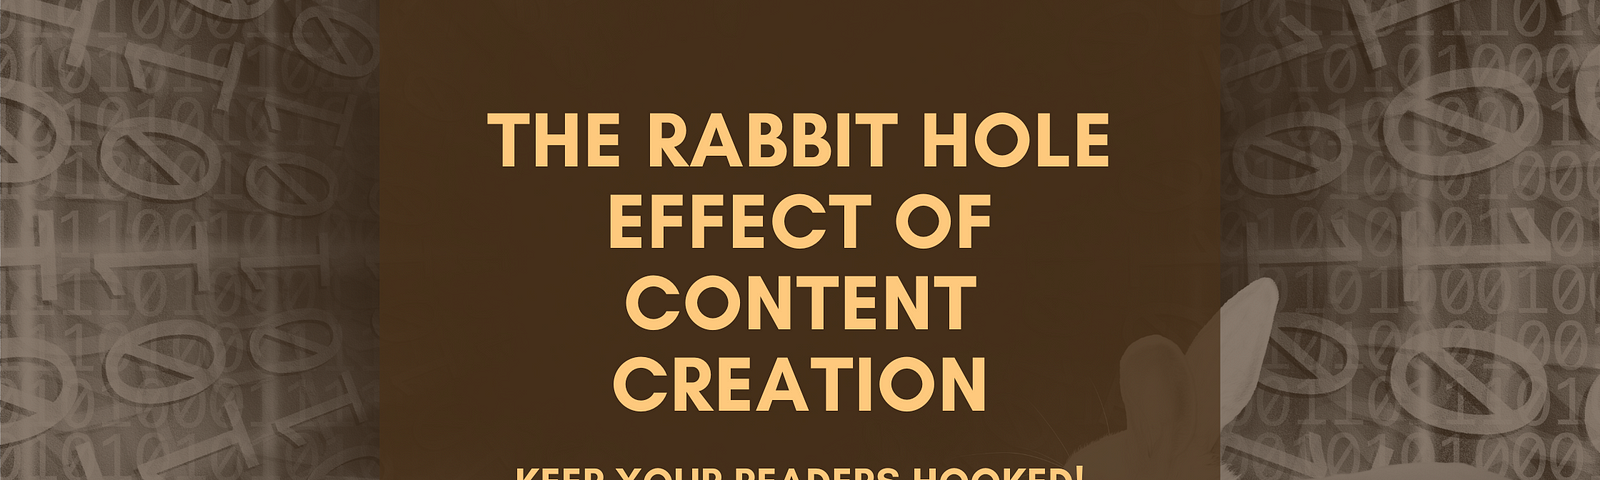 The Rabbit Hole Effect of Content Creation